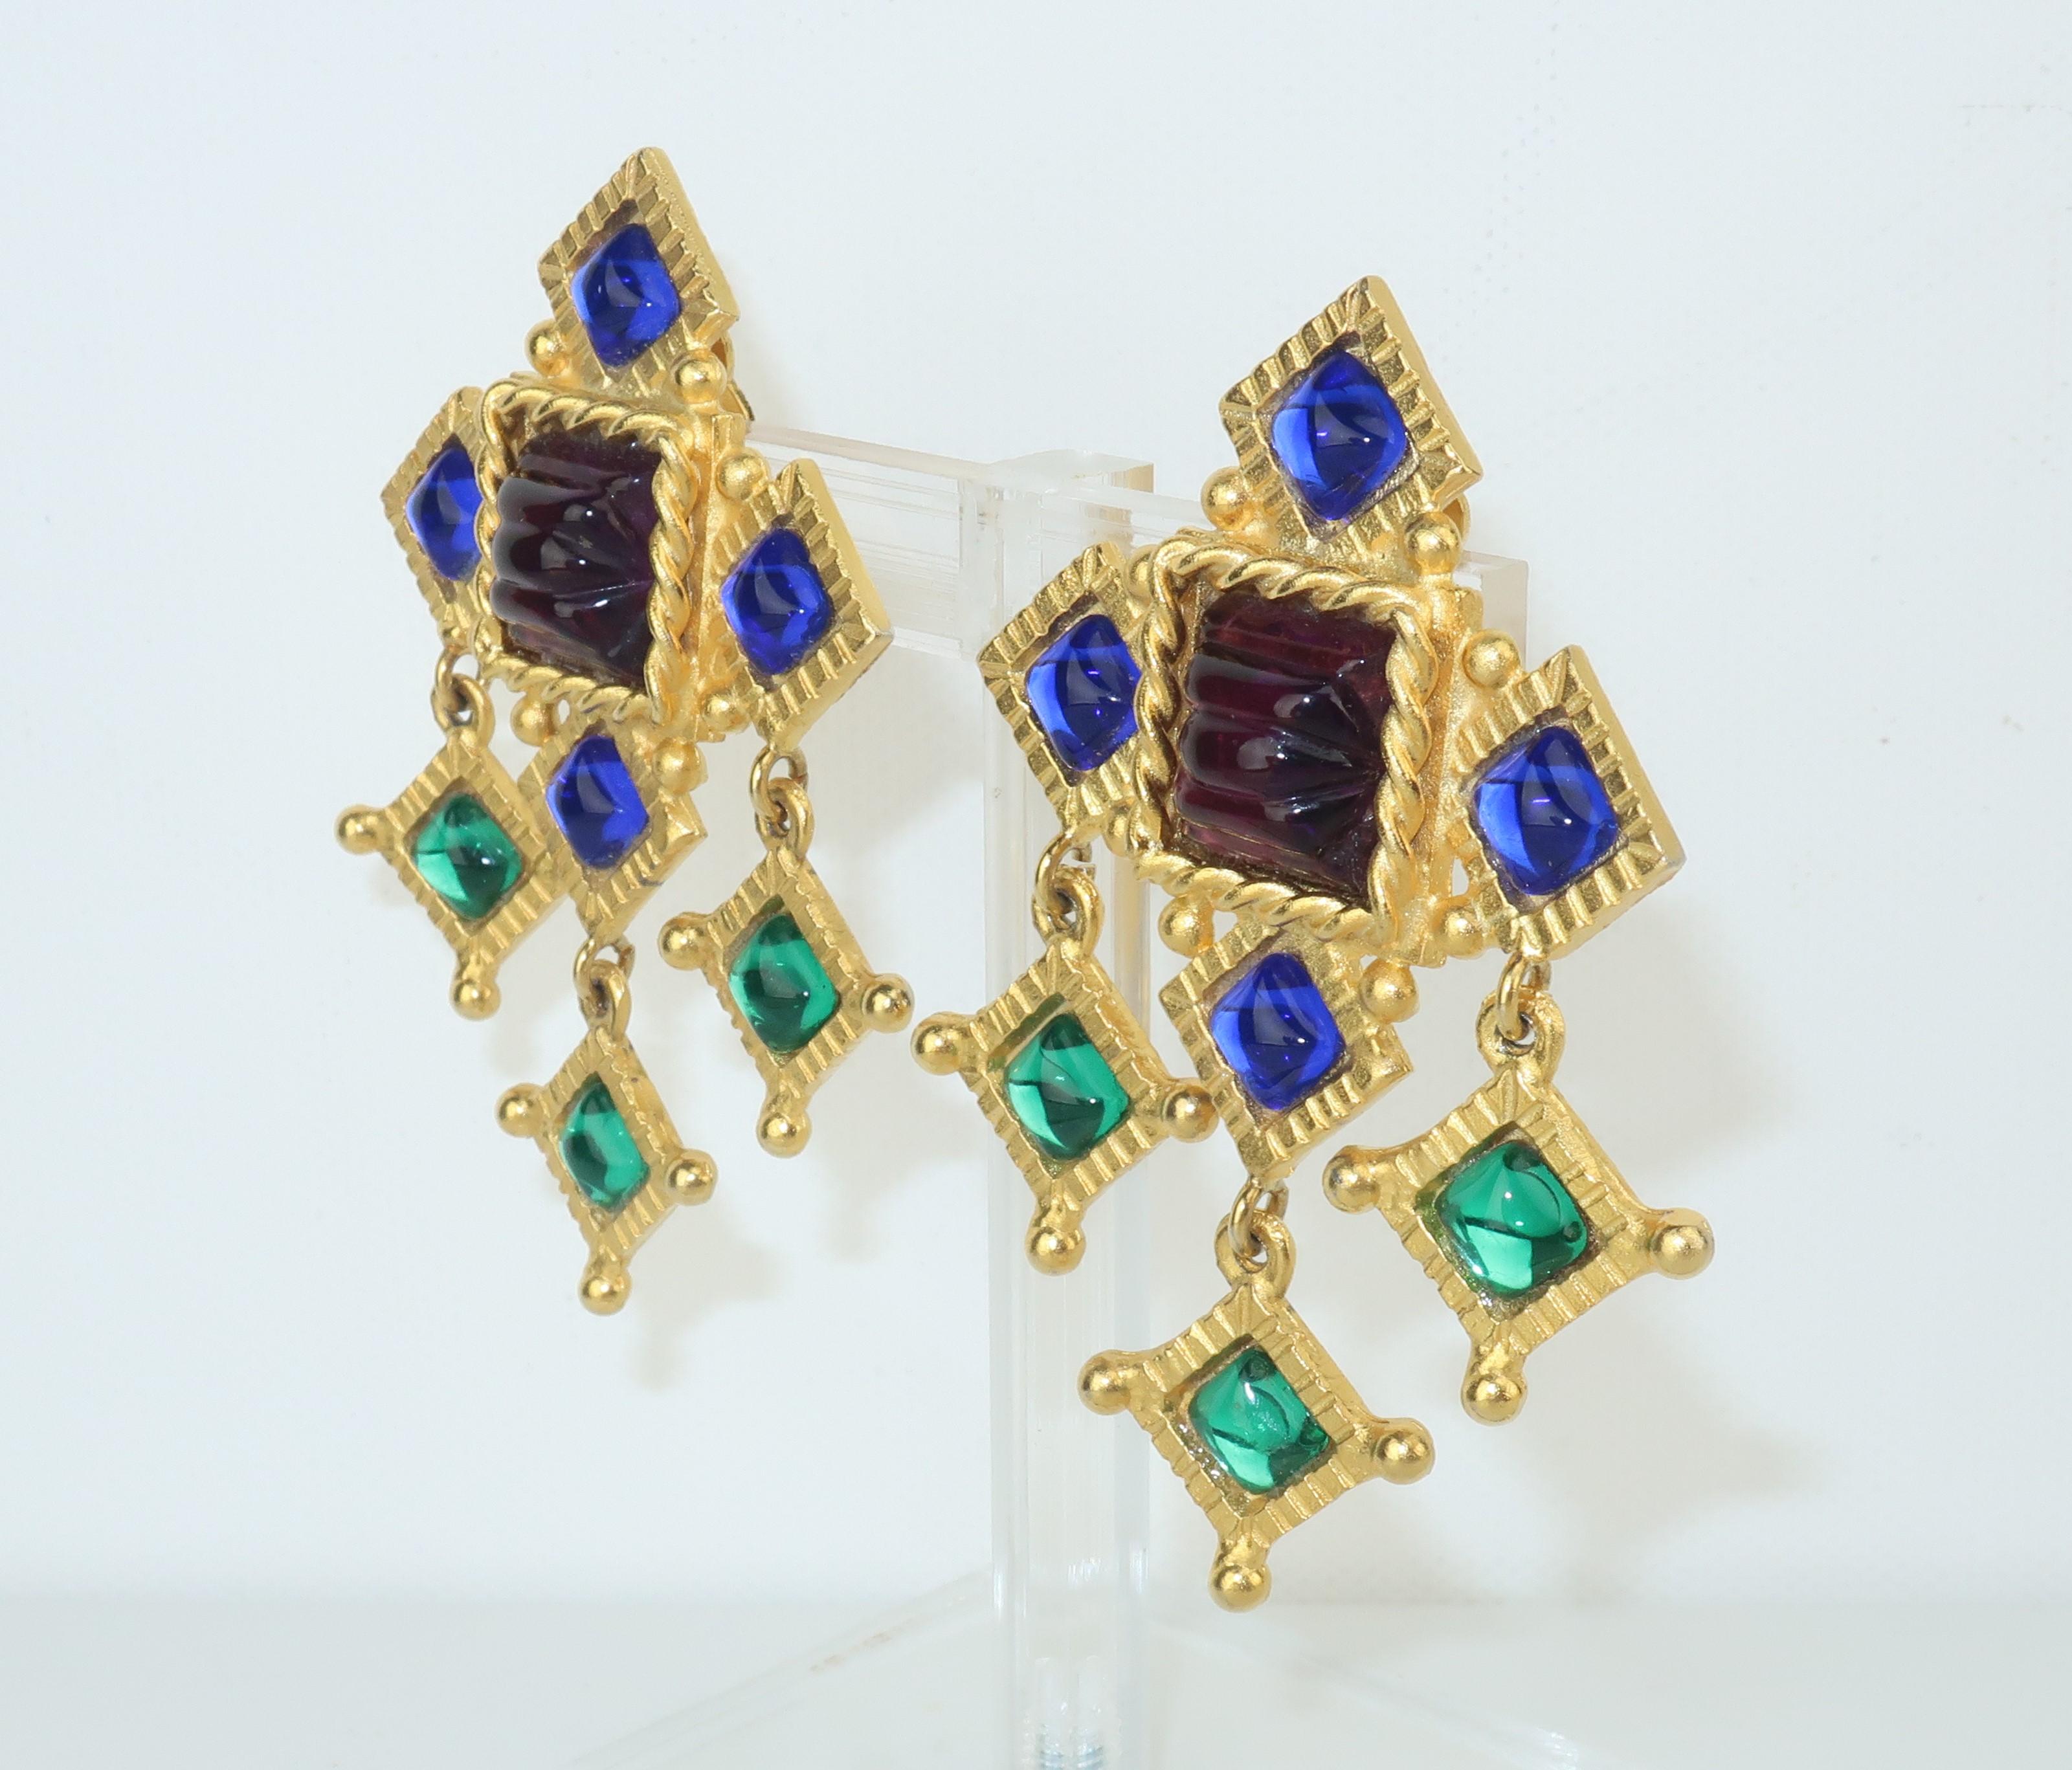 Byzantine Gerard Yosca Gold Earrings With Cabochon Glass Stones